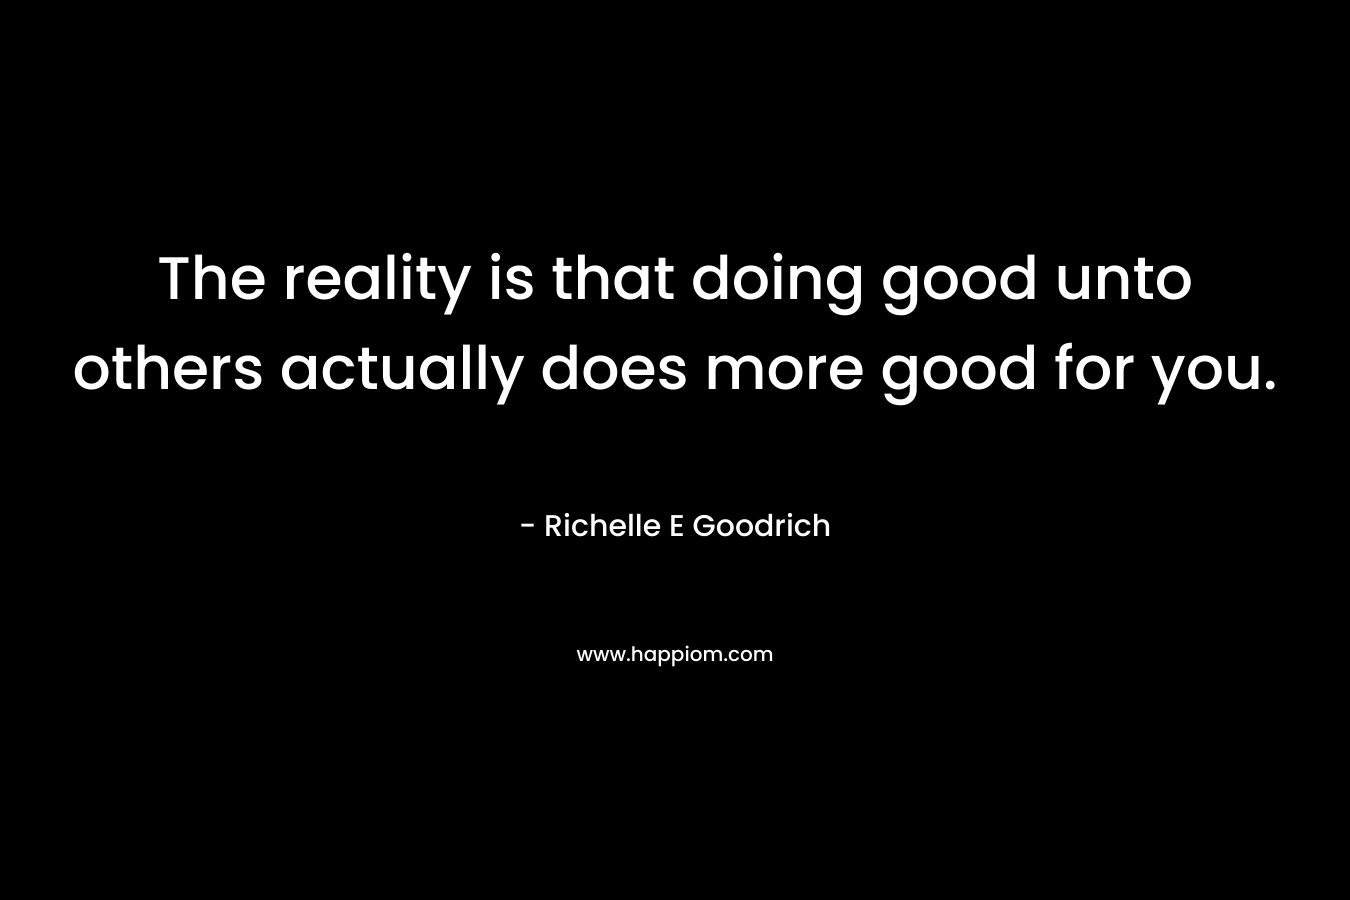 The reality is that doing good unto others actually does more good for you.